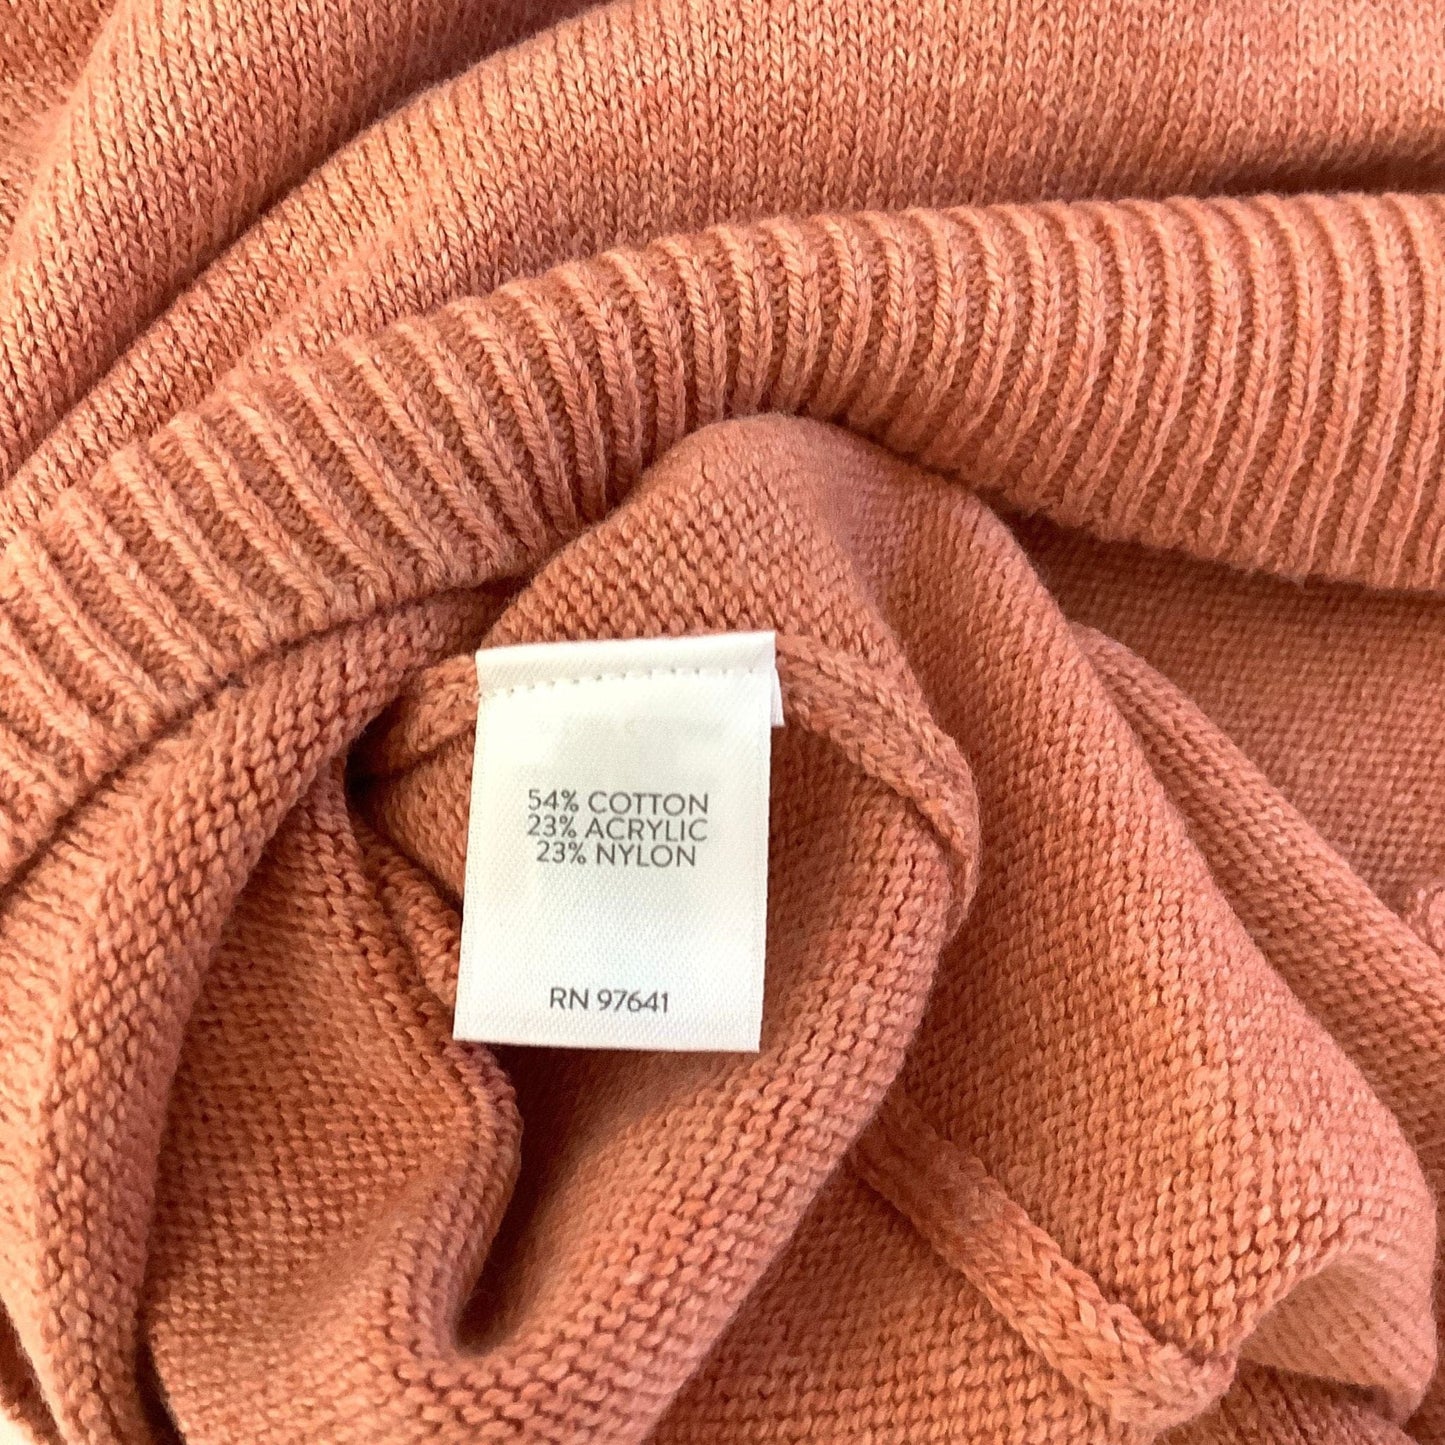 Pure J Jill Knitted Dress Extra Large / Orange / Y2K - Now